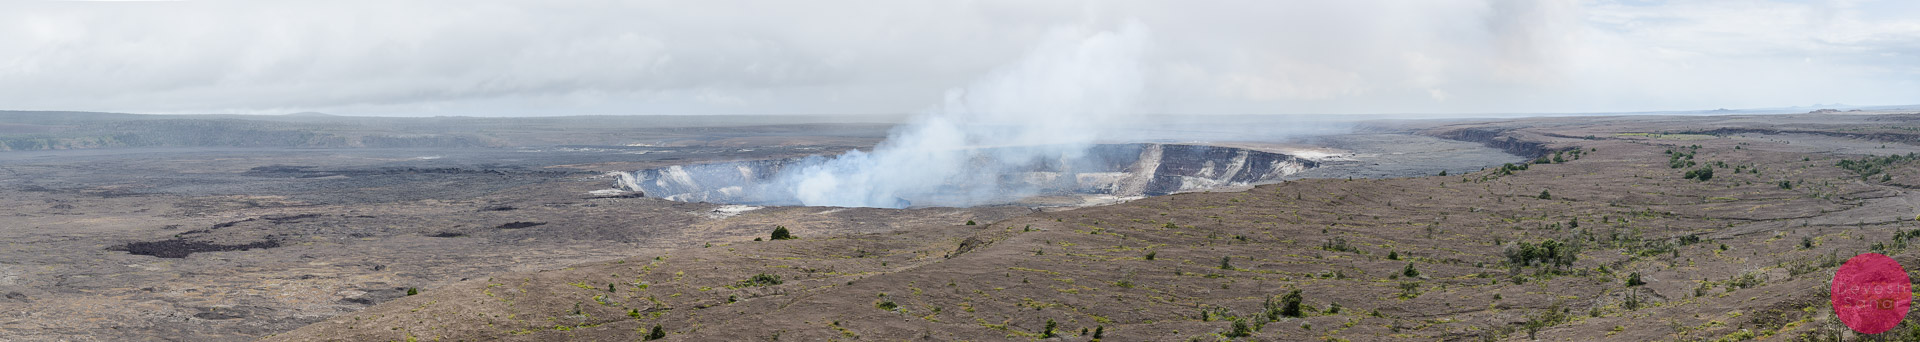 A panoramic view of the Kilauea Caldera from the Jagger Museum, Hawaii Volcanoes National Park